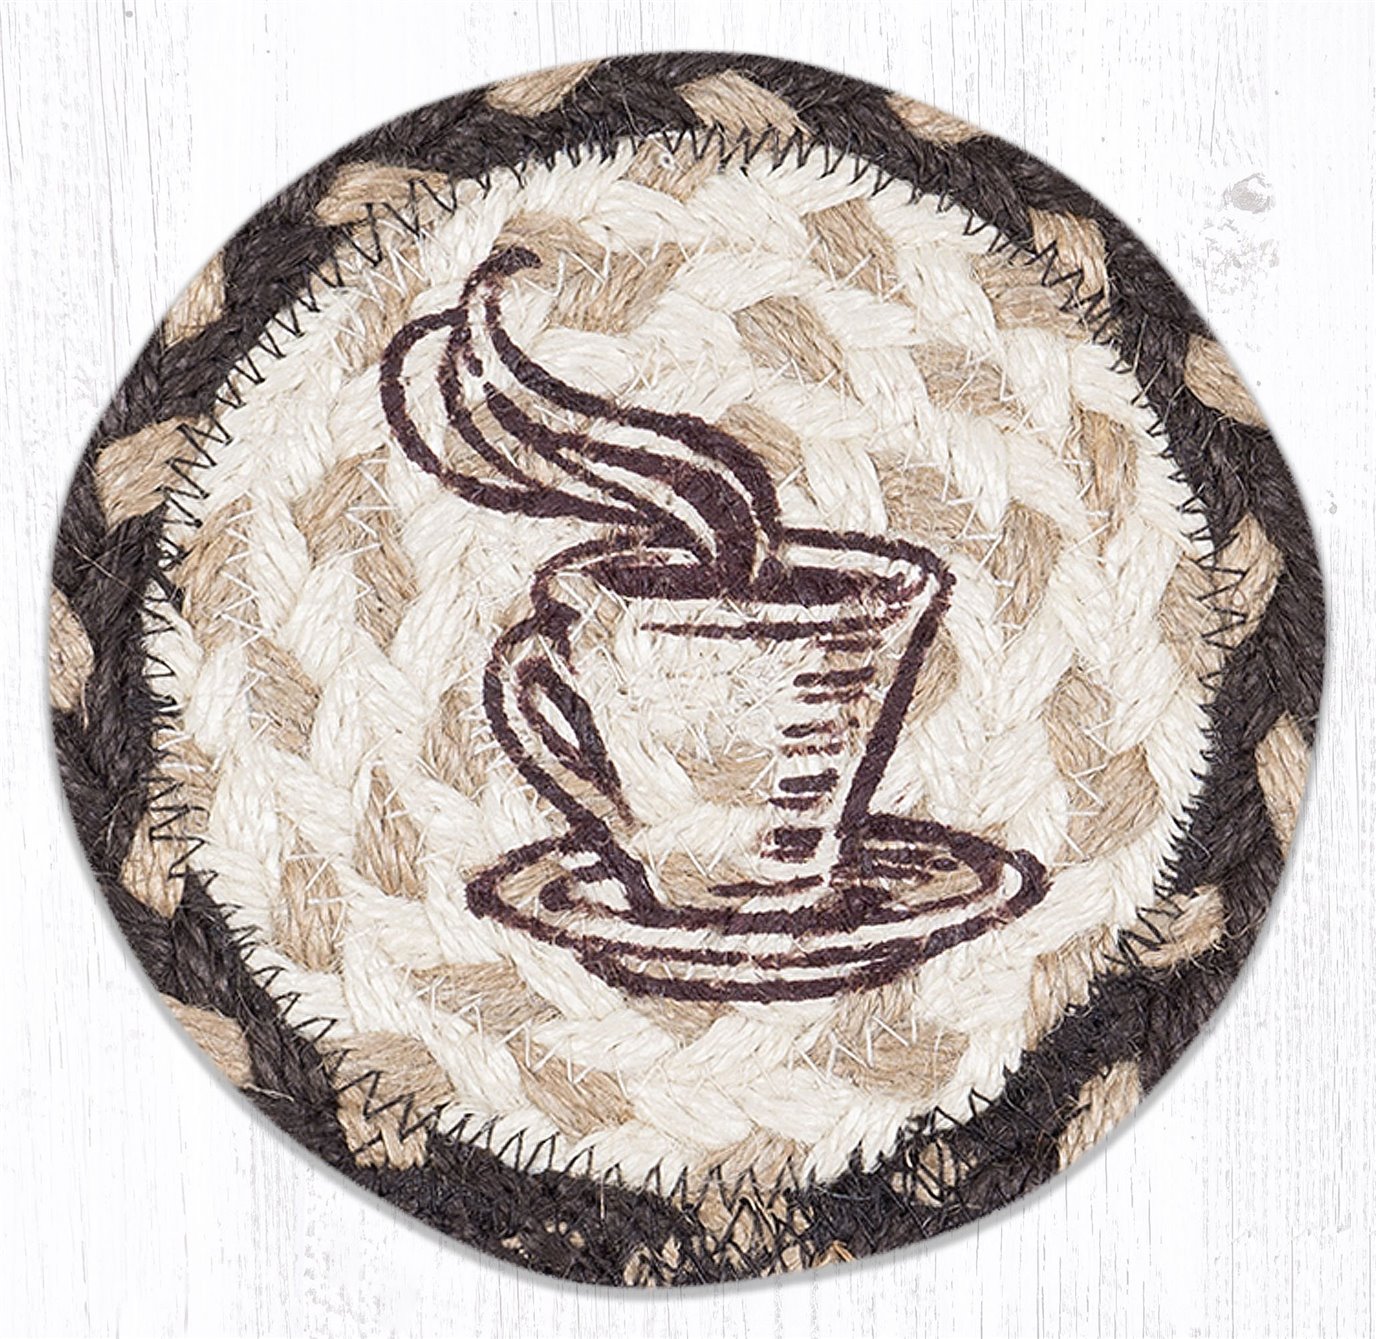 One Good Cup Printed Braided Coaster 5"x5" Set of 4